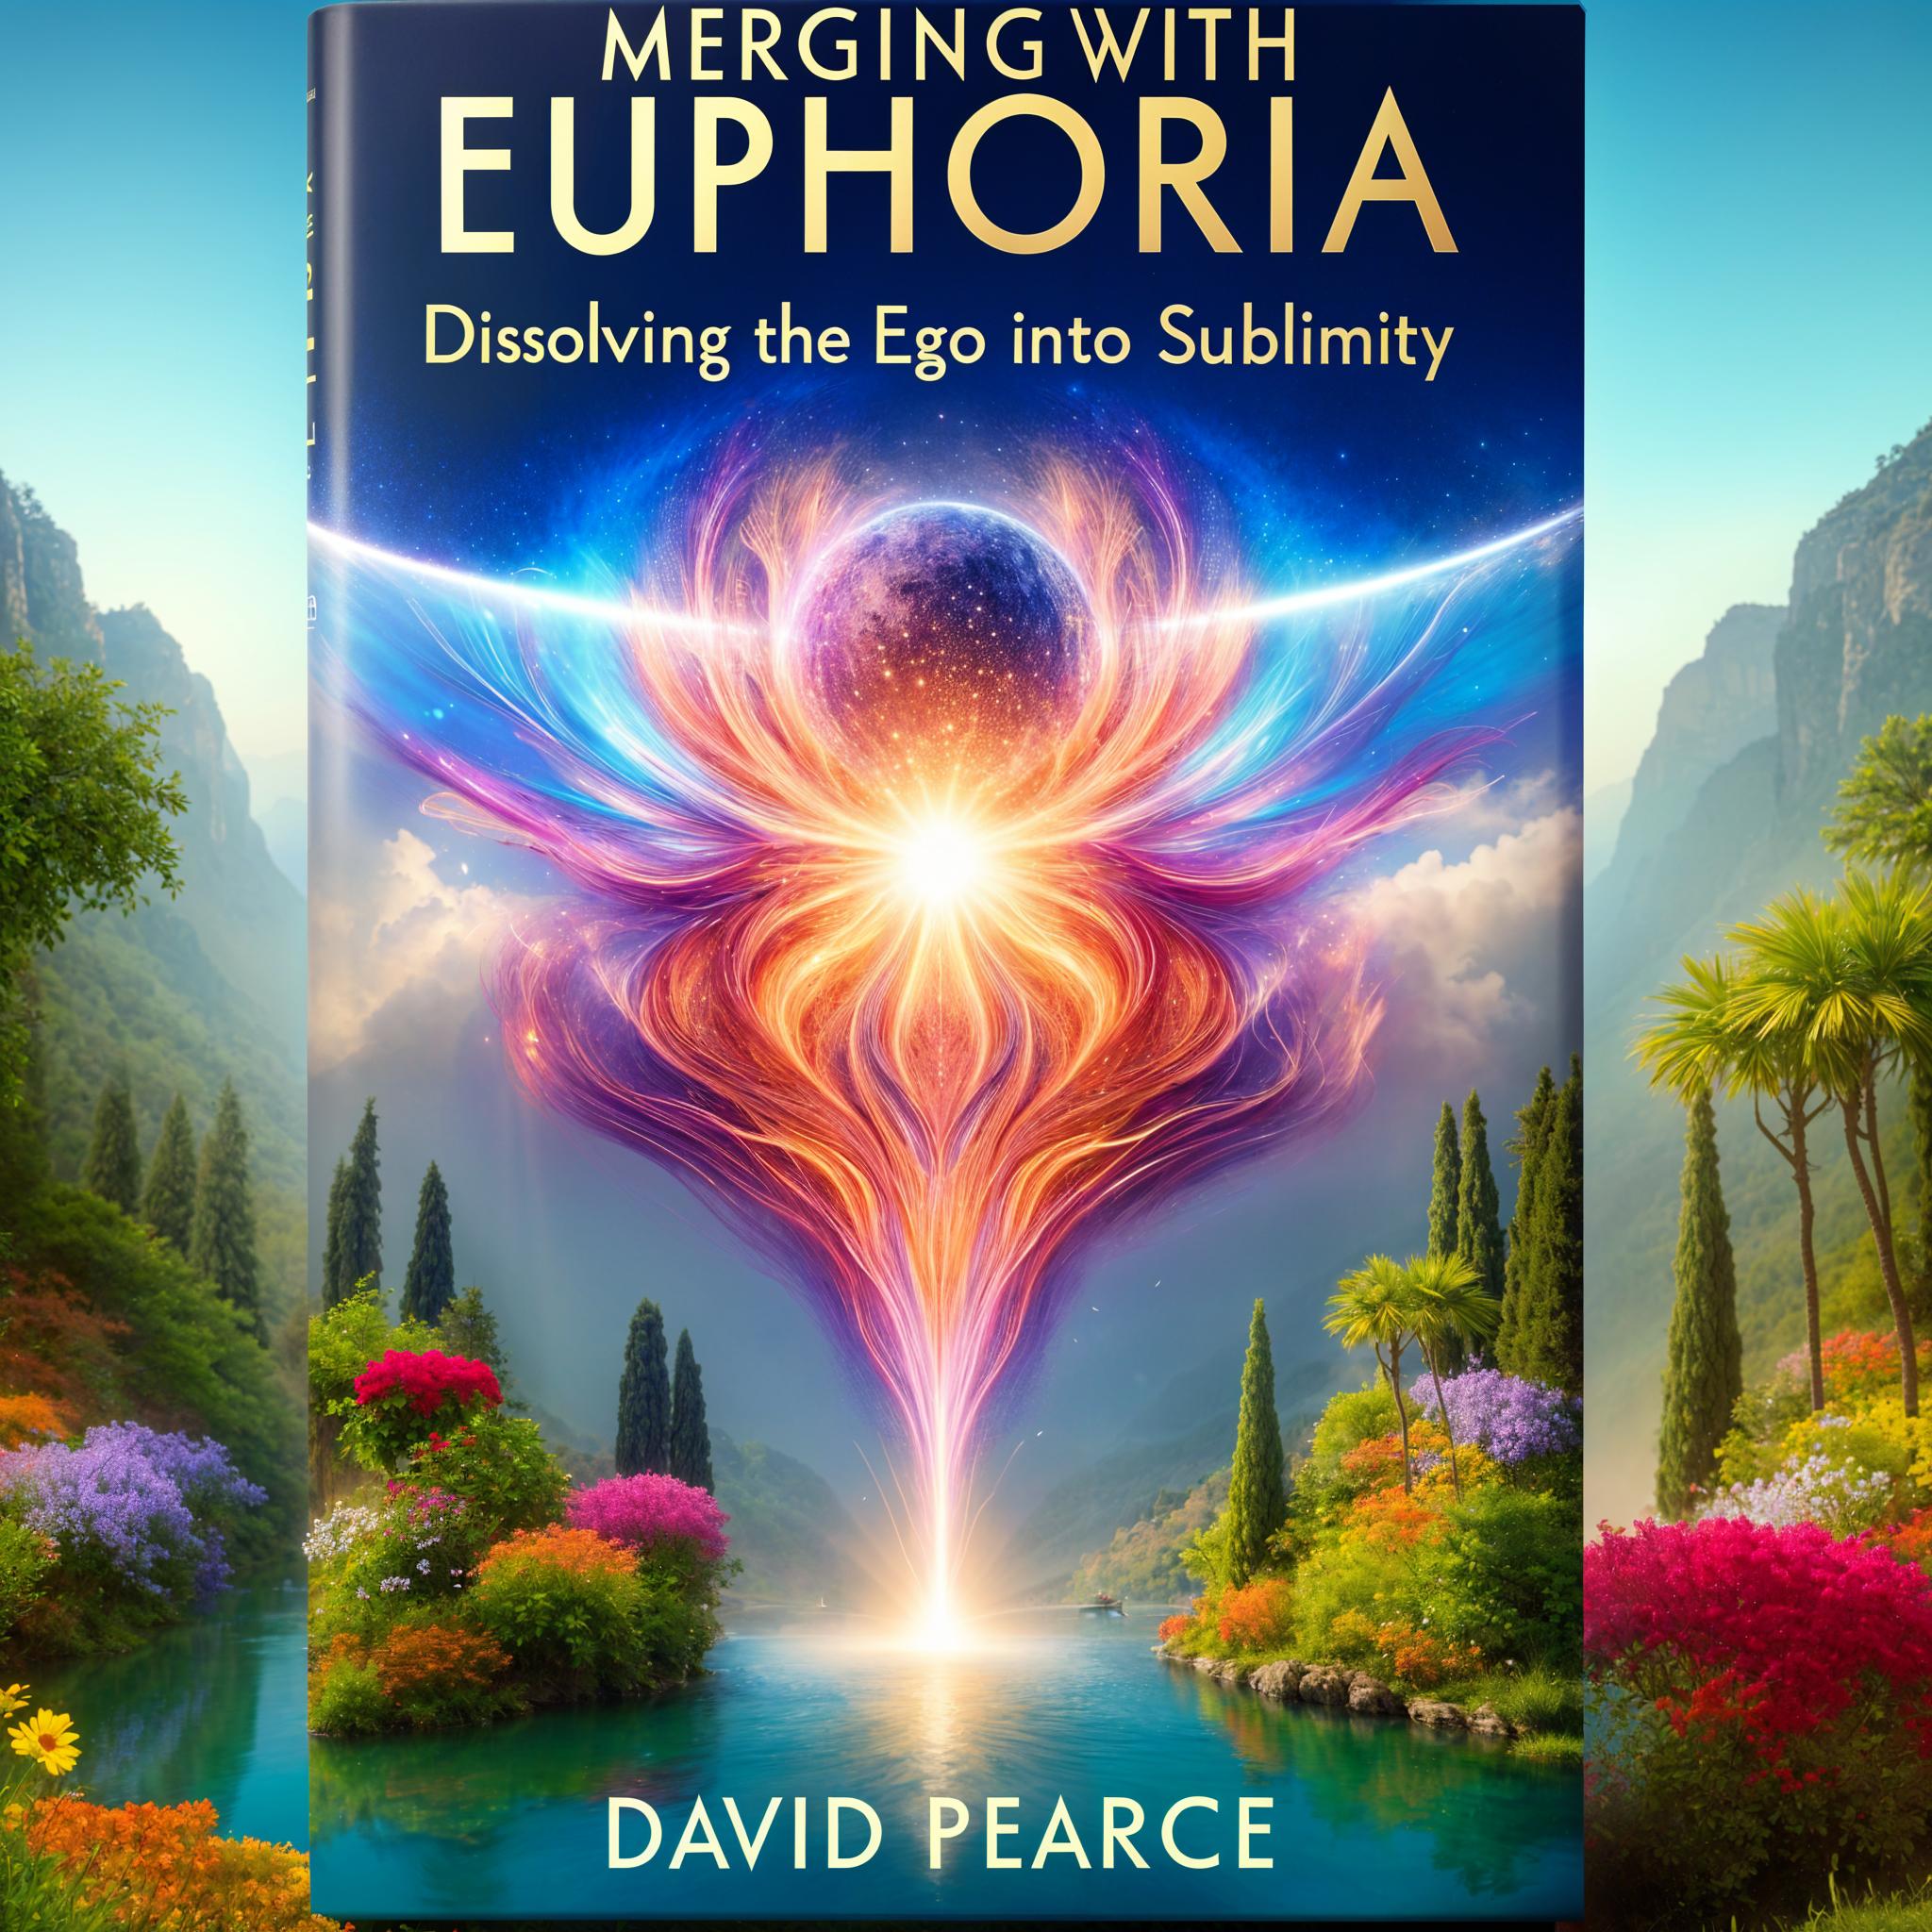 Merging with Euphoria: Dissolving the Ego into Sublimity by David Pearce